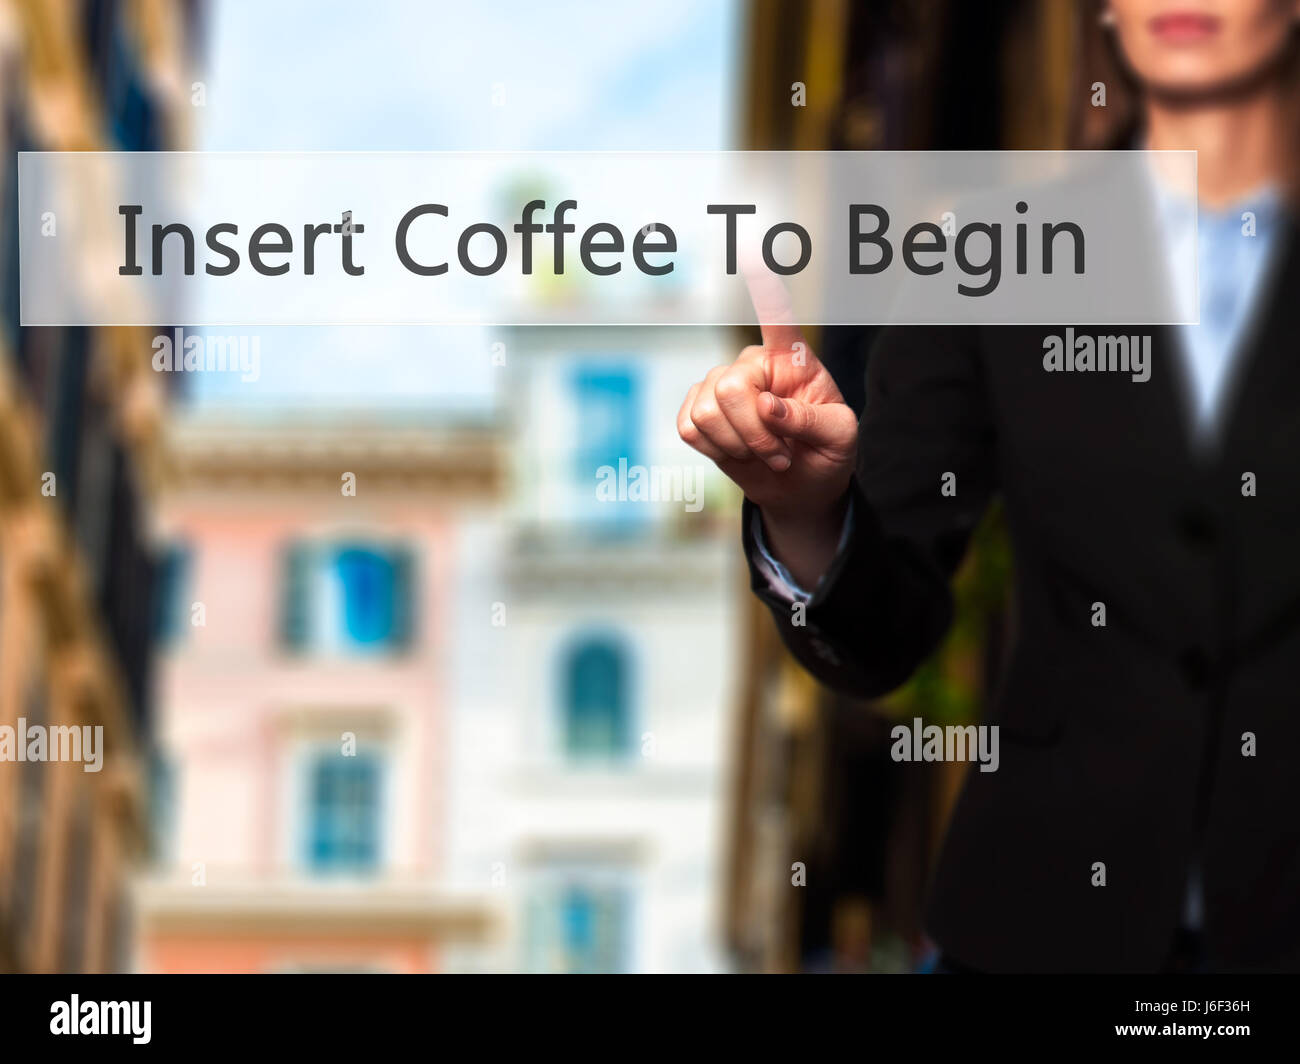 Insert Coffee To Begin - Businesswoman hand pressing button on touch screen interface. Business, technology, internet concept. Stock Photo Stock Photo